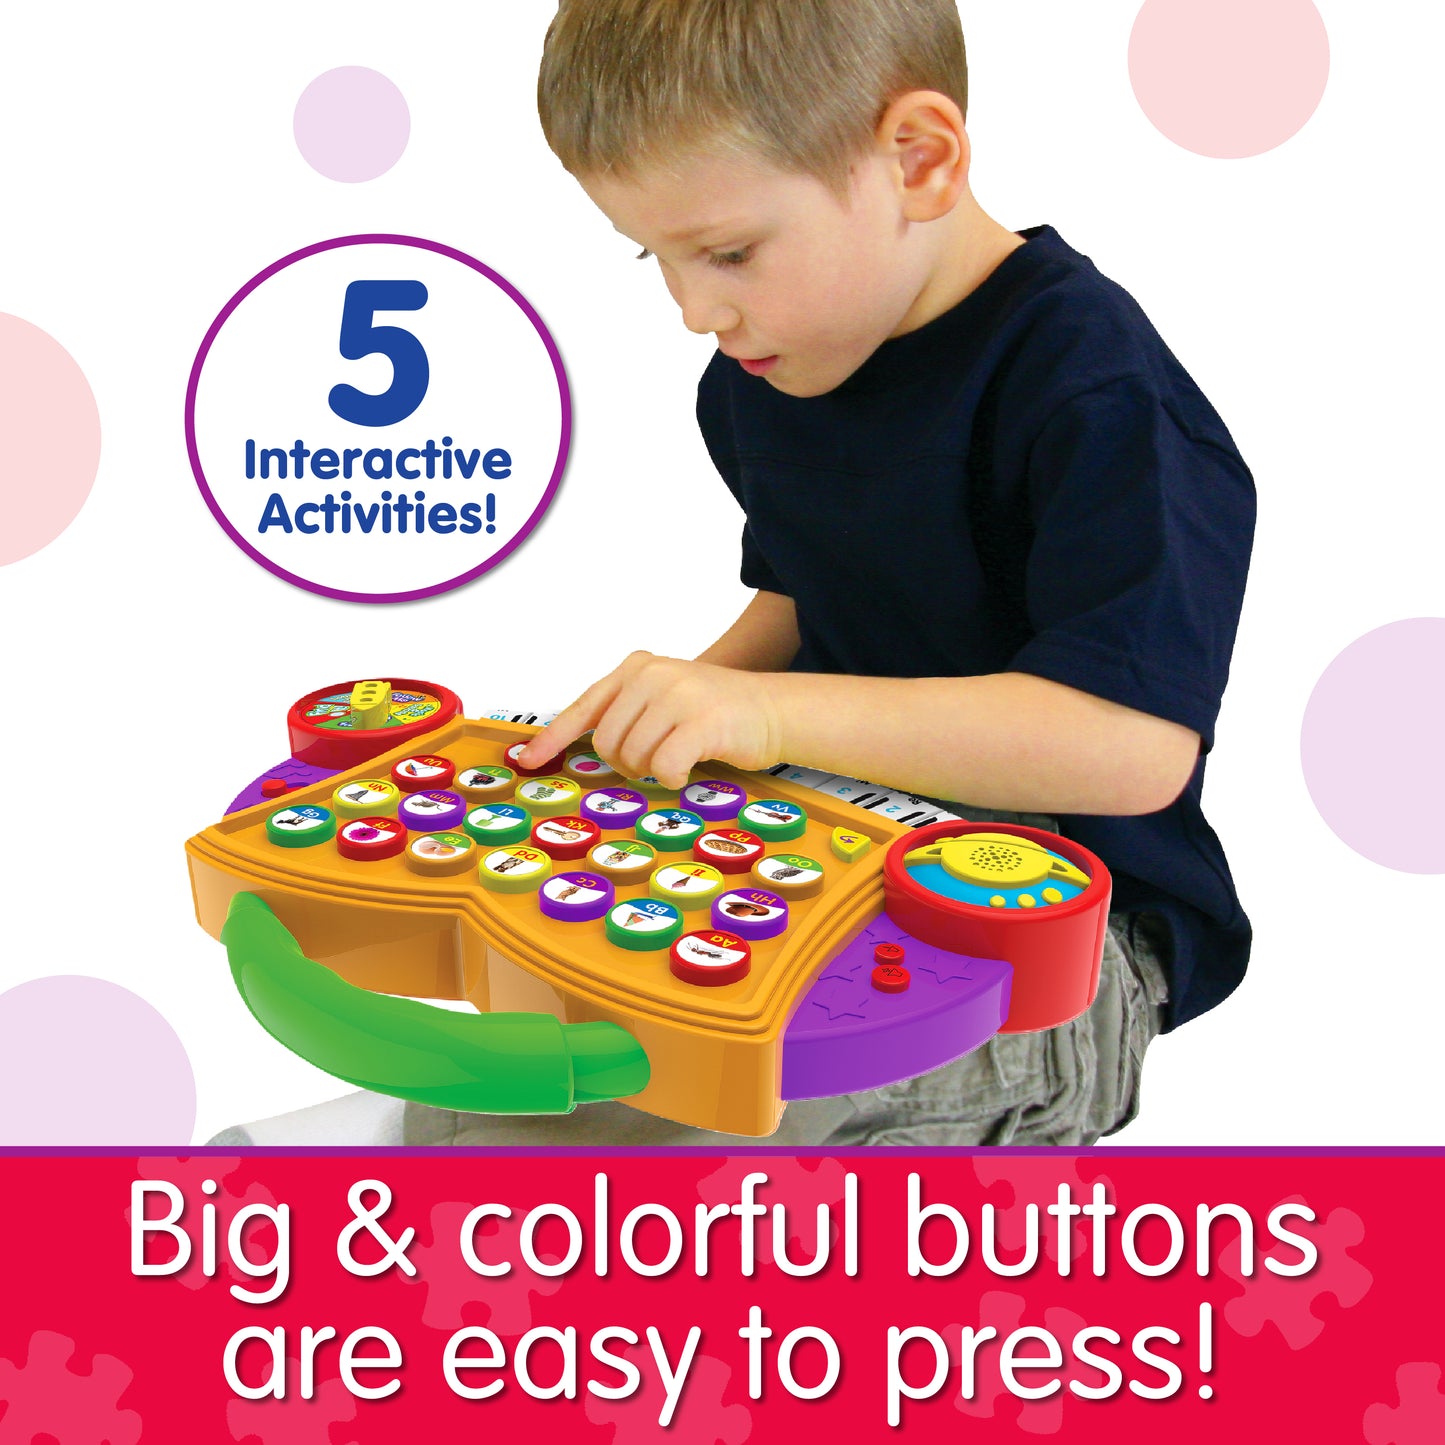 Infographic of young boy with ABC Melody Maker that reads "Big & Colorful buttons are easy to press!"